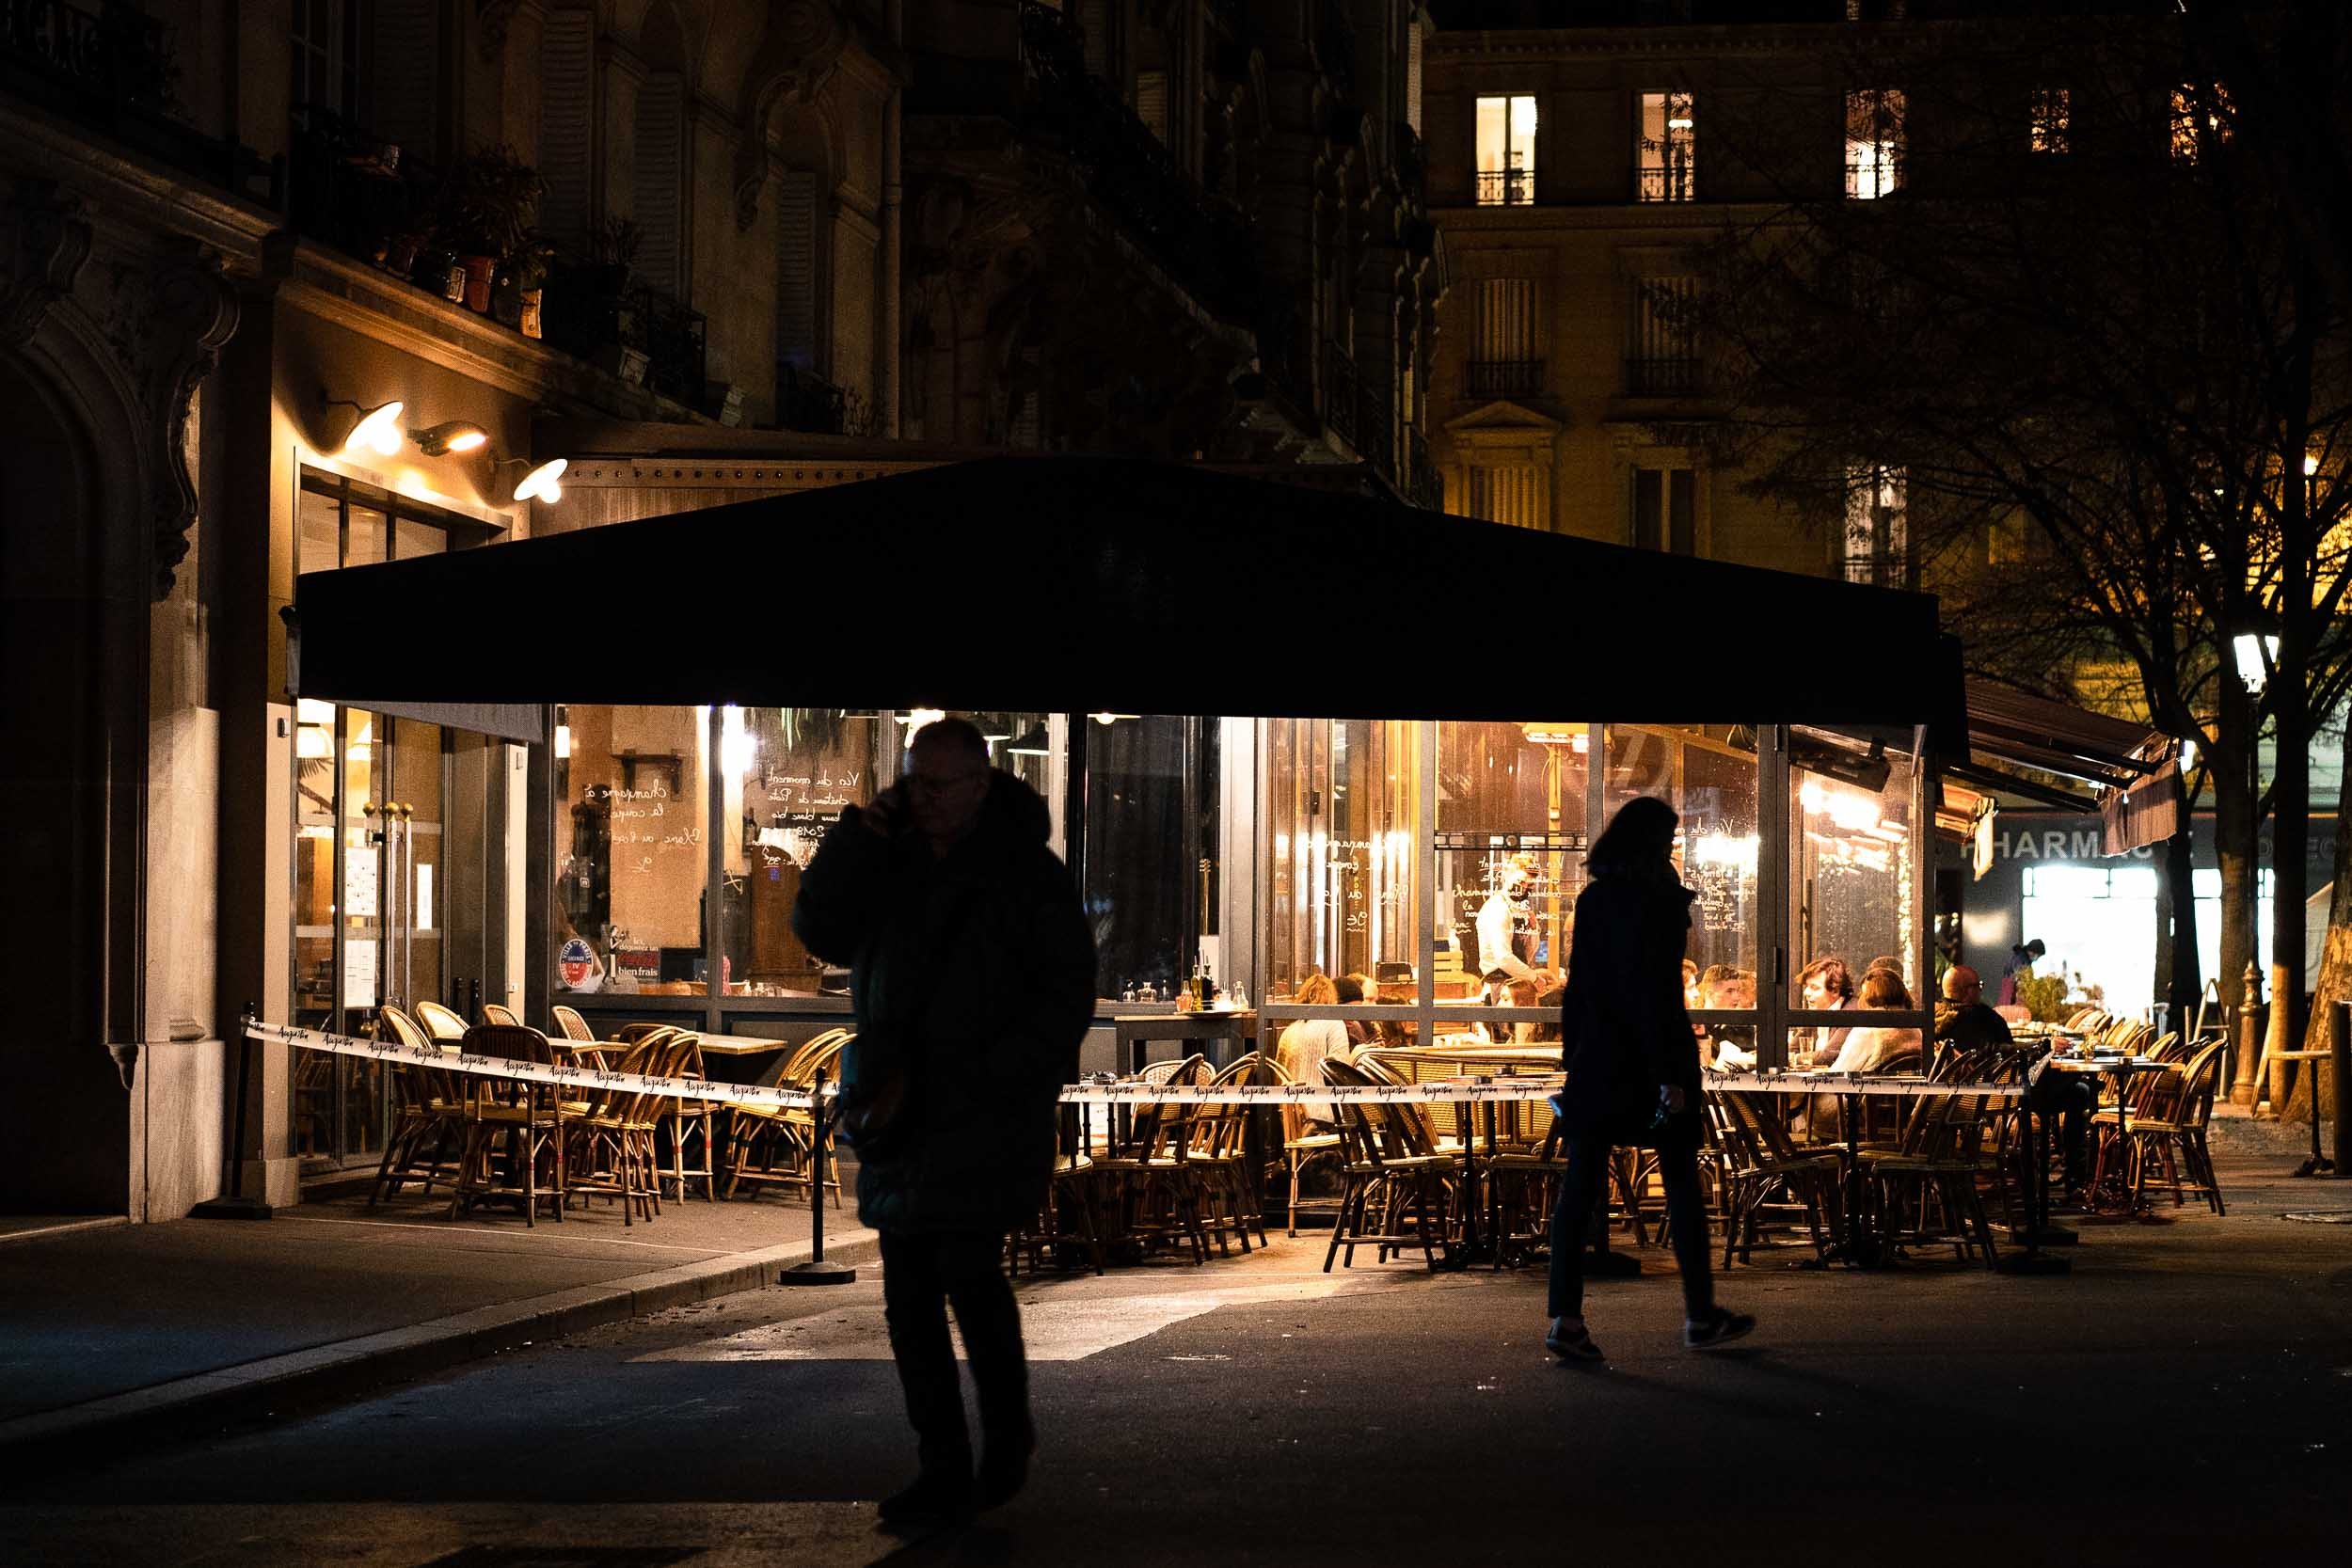 017-silhouettes-in-front-of-bar-paris.jpg